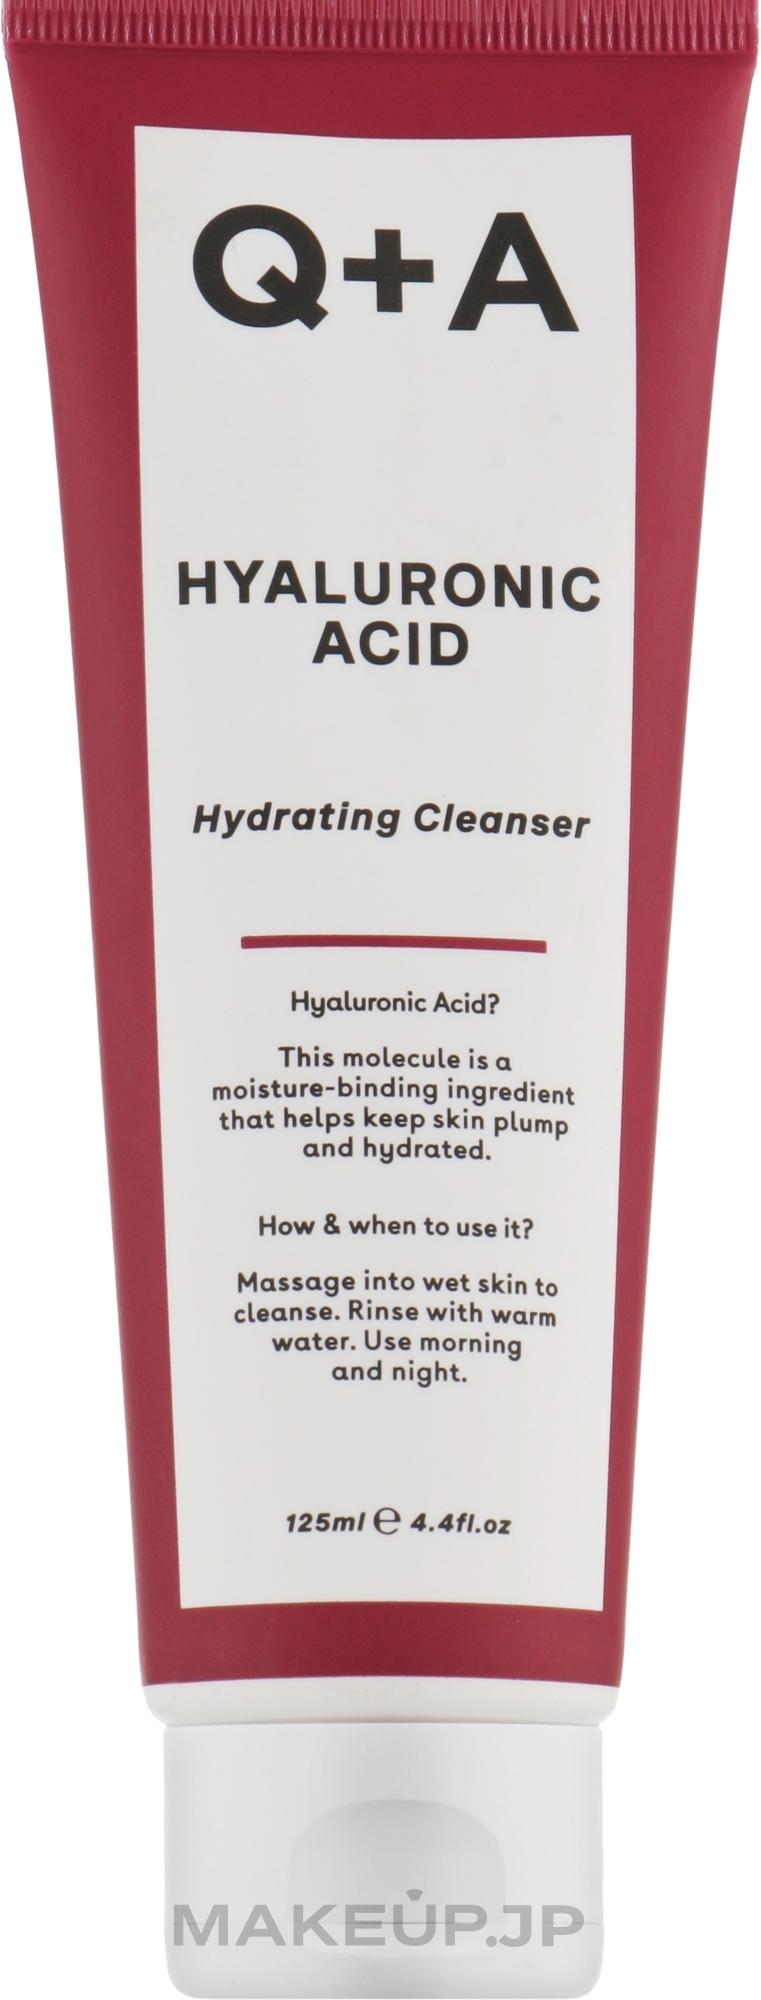 Hydrating Hyaluronic Acid Cleanser - Q+A Hyaluronic Acid Hydrating Cleanser — photo 125 ml